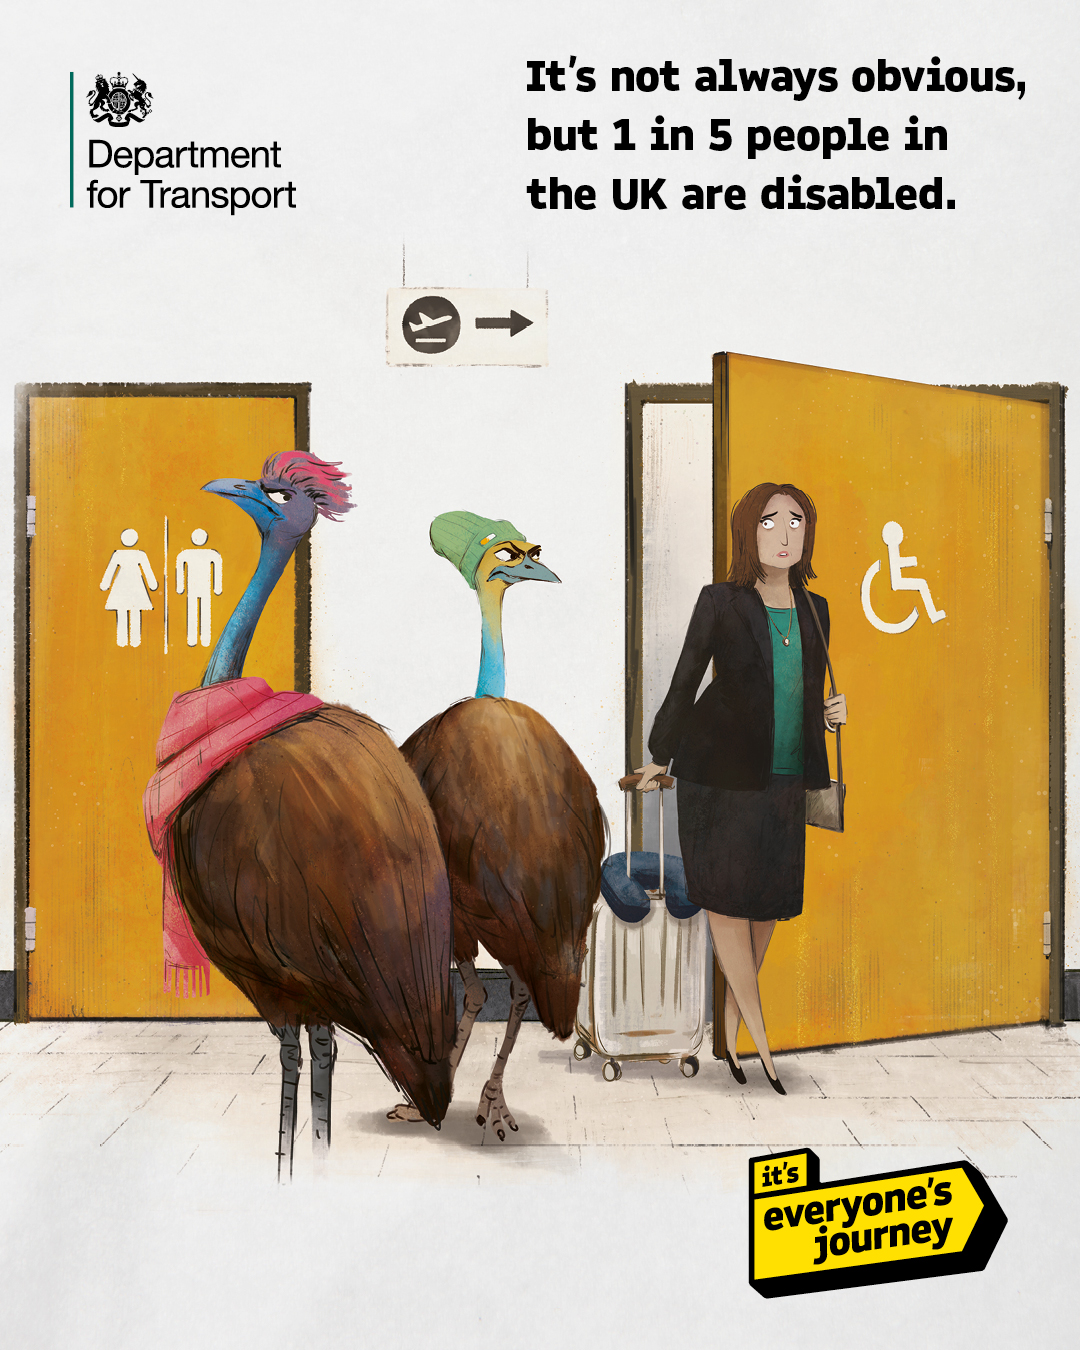 ‘it’s everyone’s journey’ – making transport more inclusive